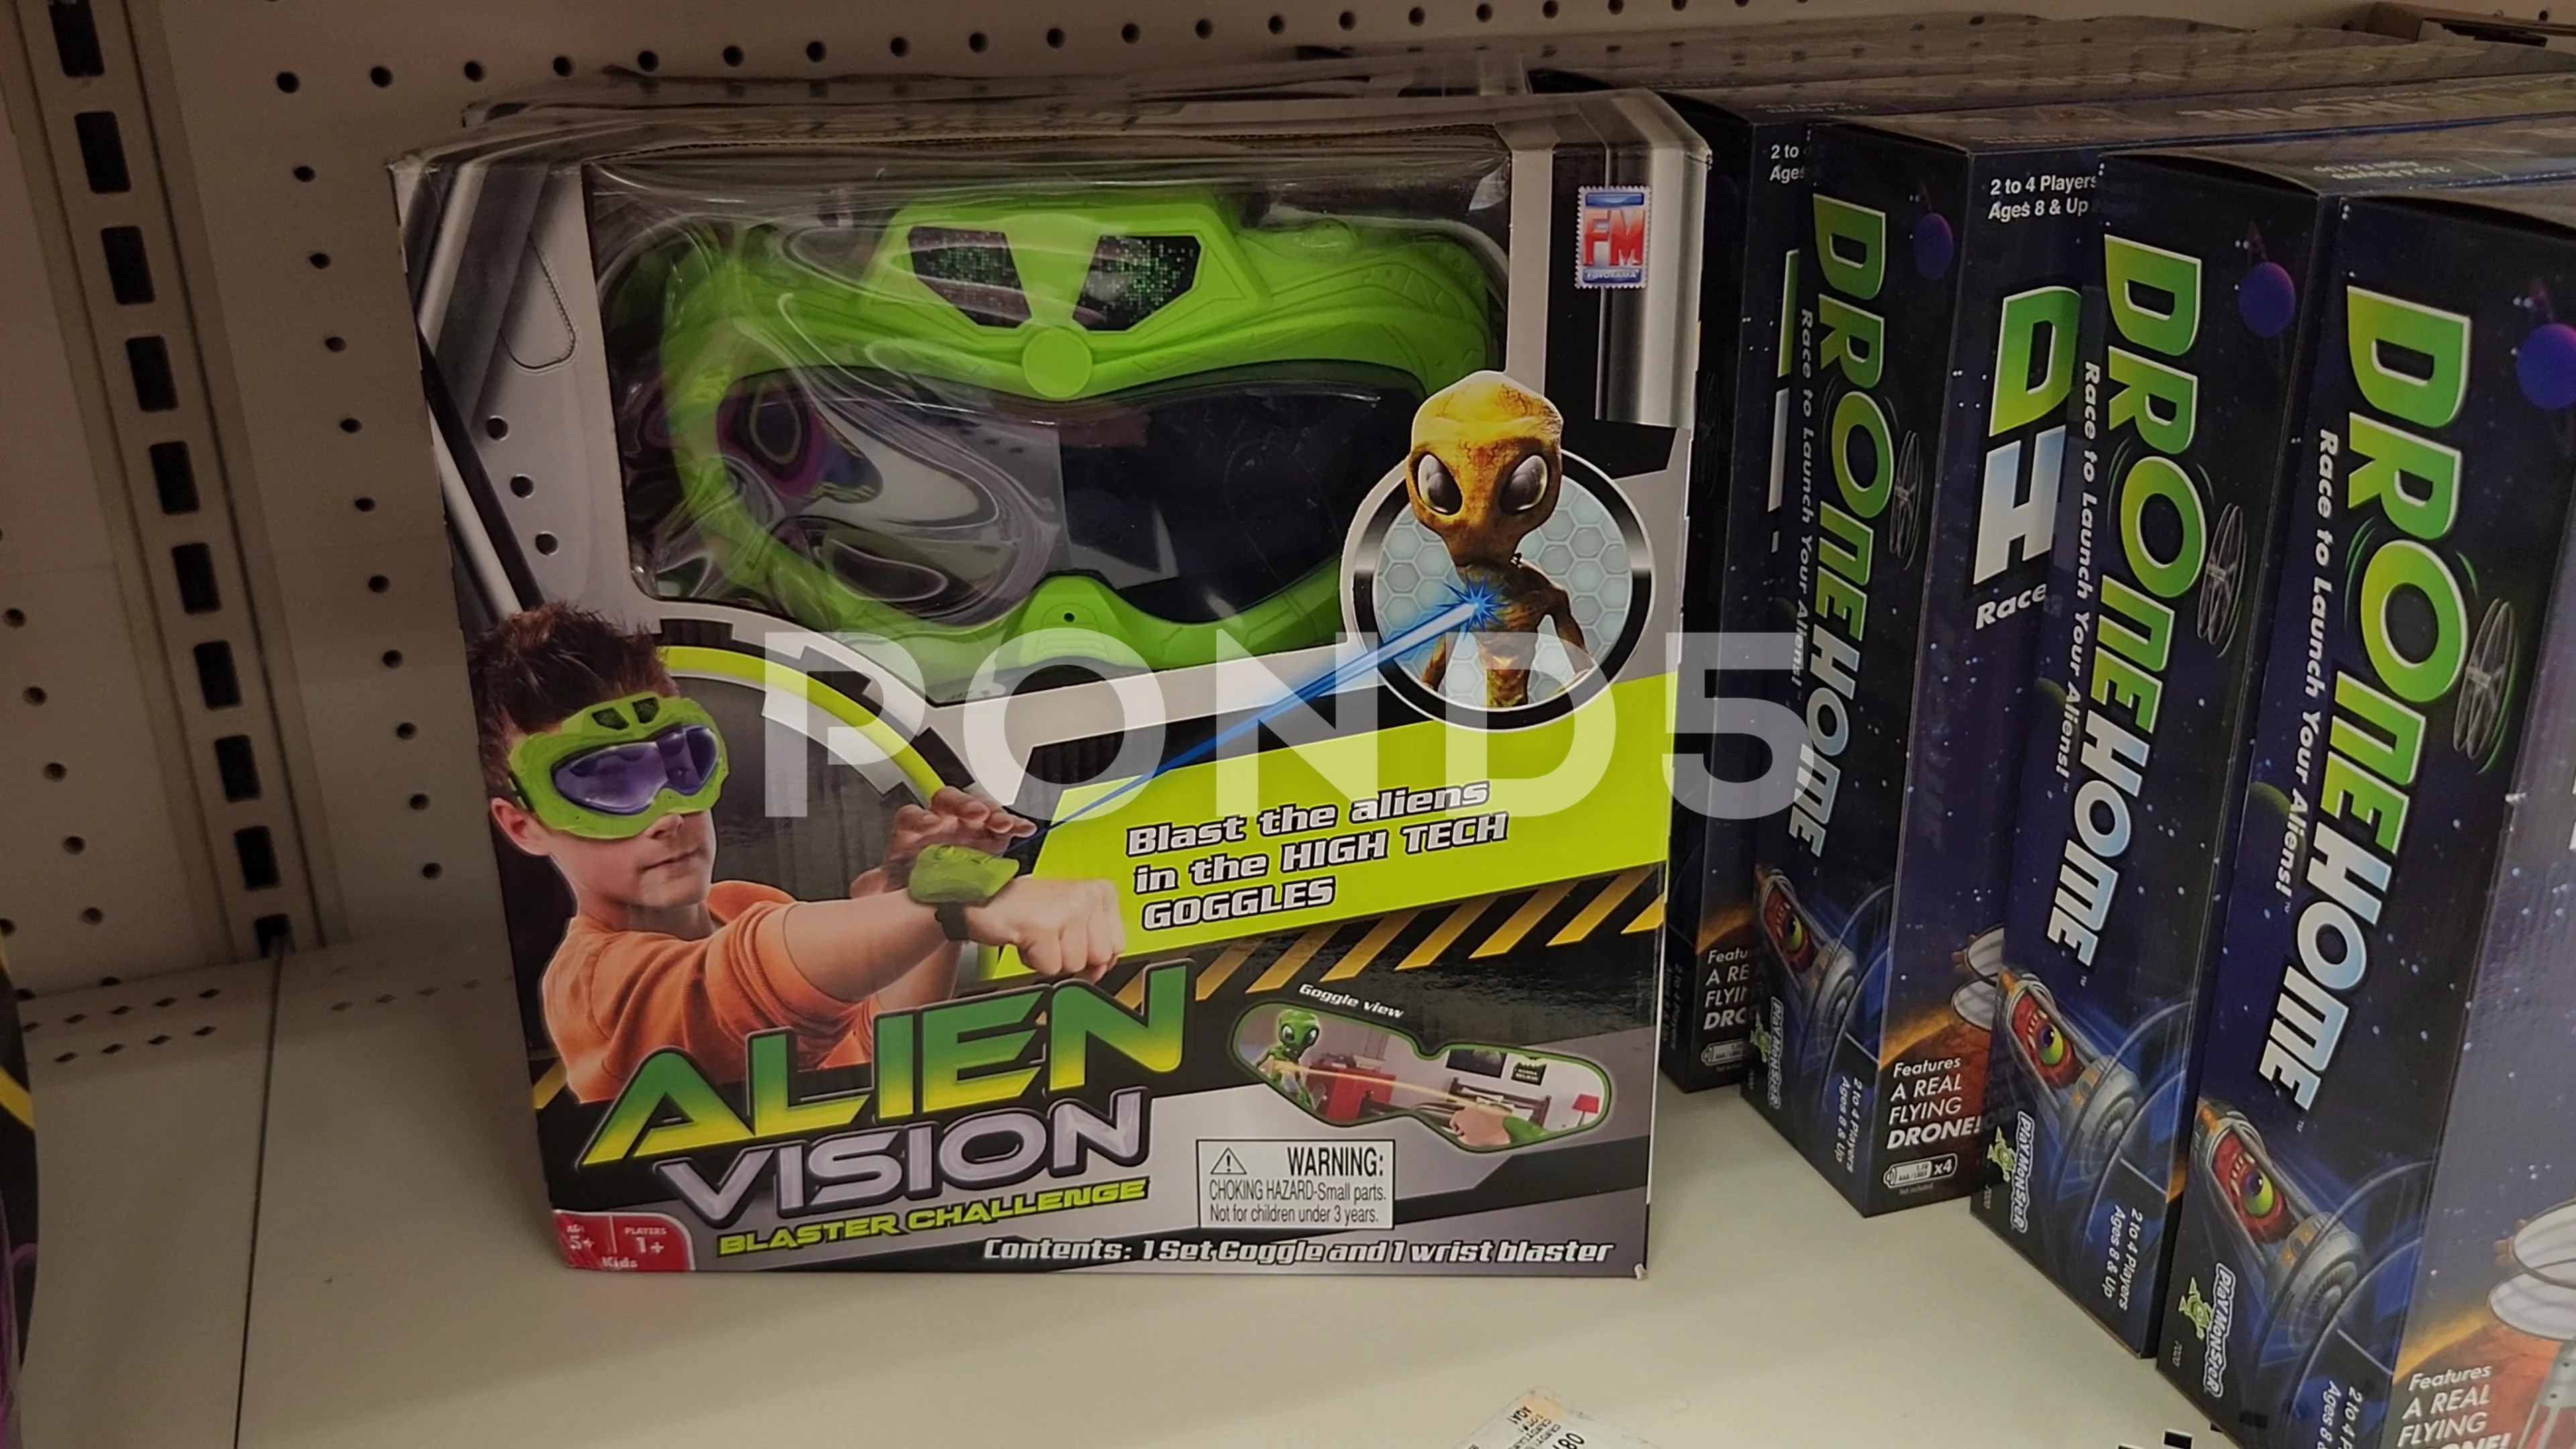 Alien Vision Product Retailer Toys, Stock Video